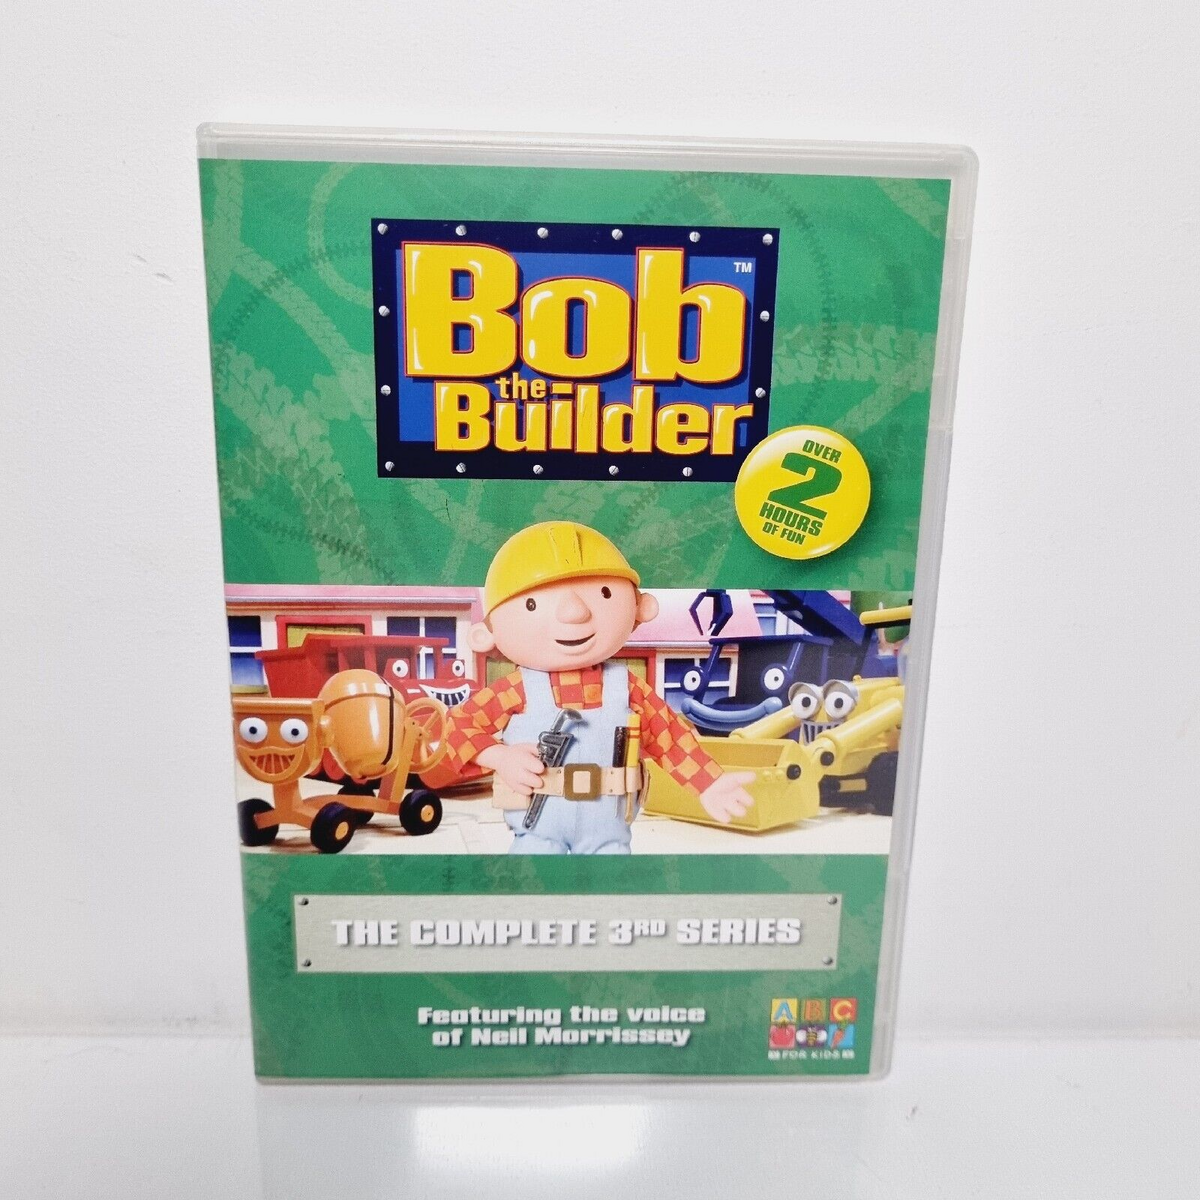 Bob the Builder - The Complete 3rd Series | ABC For Kids Wiki | Fandom